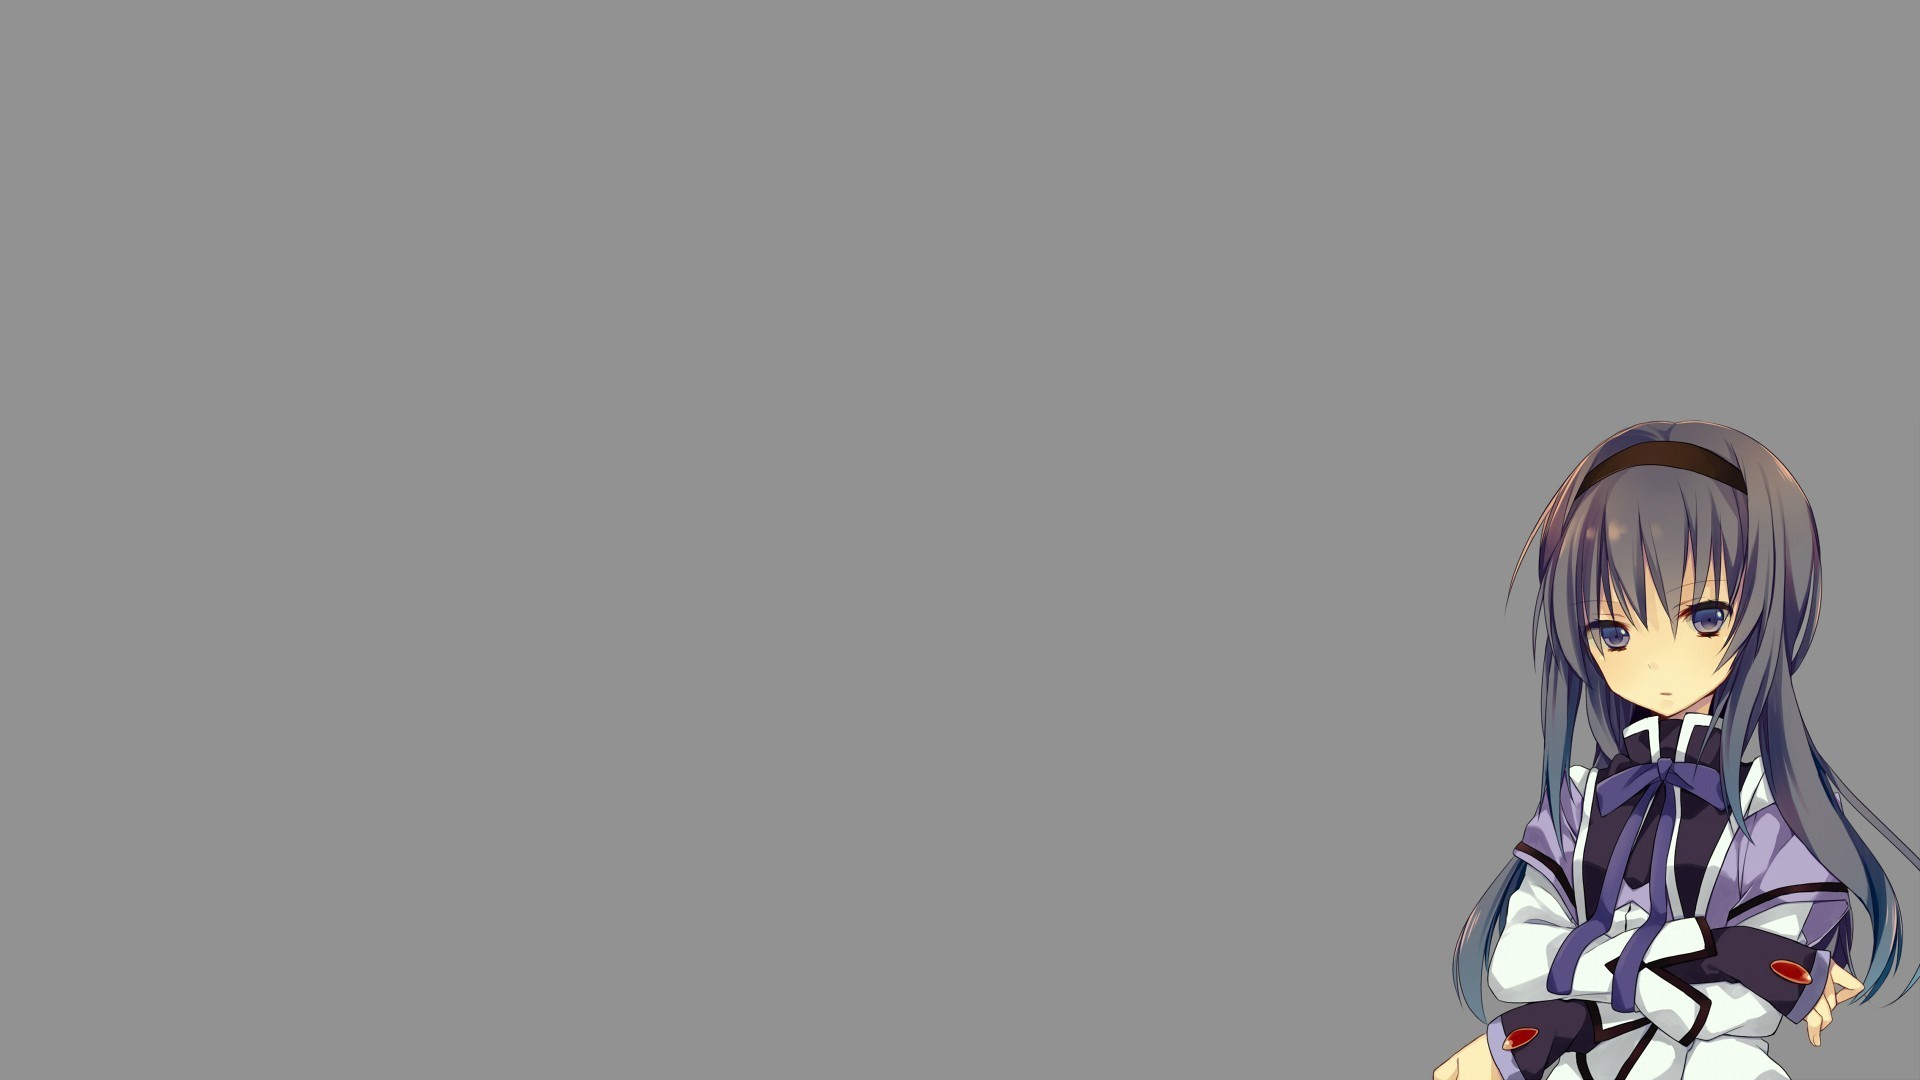 Anime 1920x1080 anime anime girls Mahou Shoujo Madoka Magica looking at viewer long hair arms crossed gray background minimalism simple background